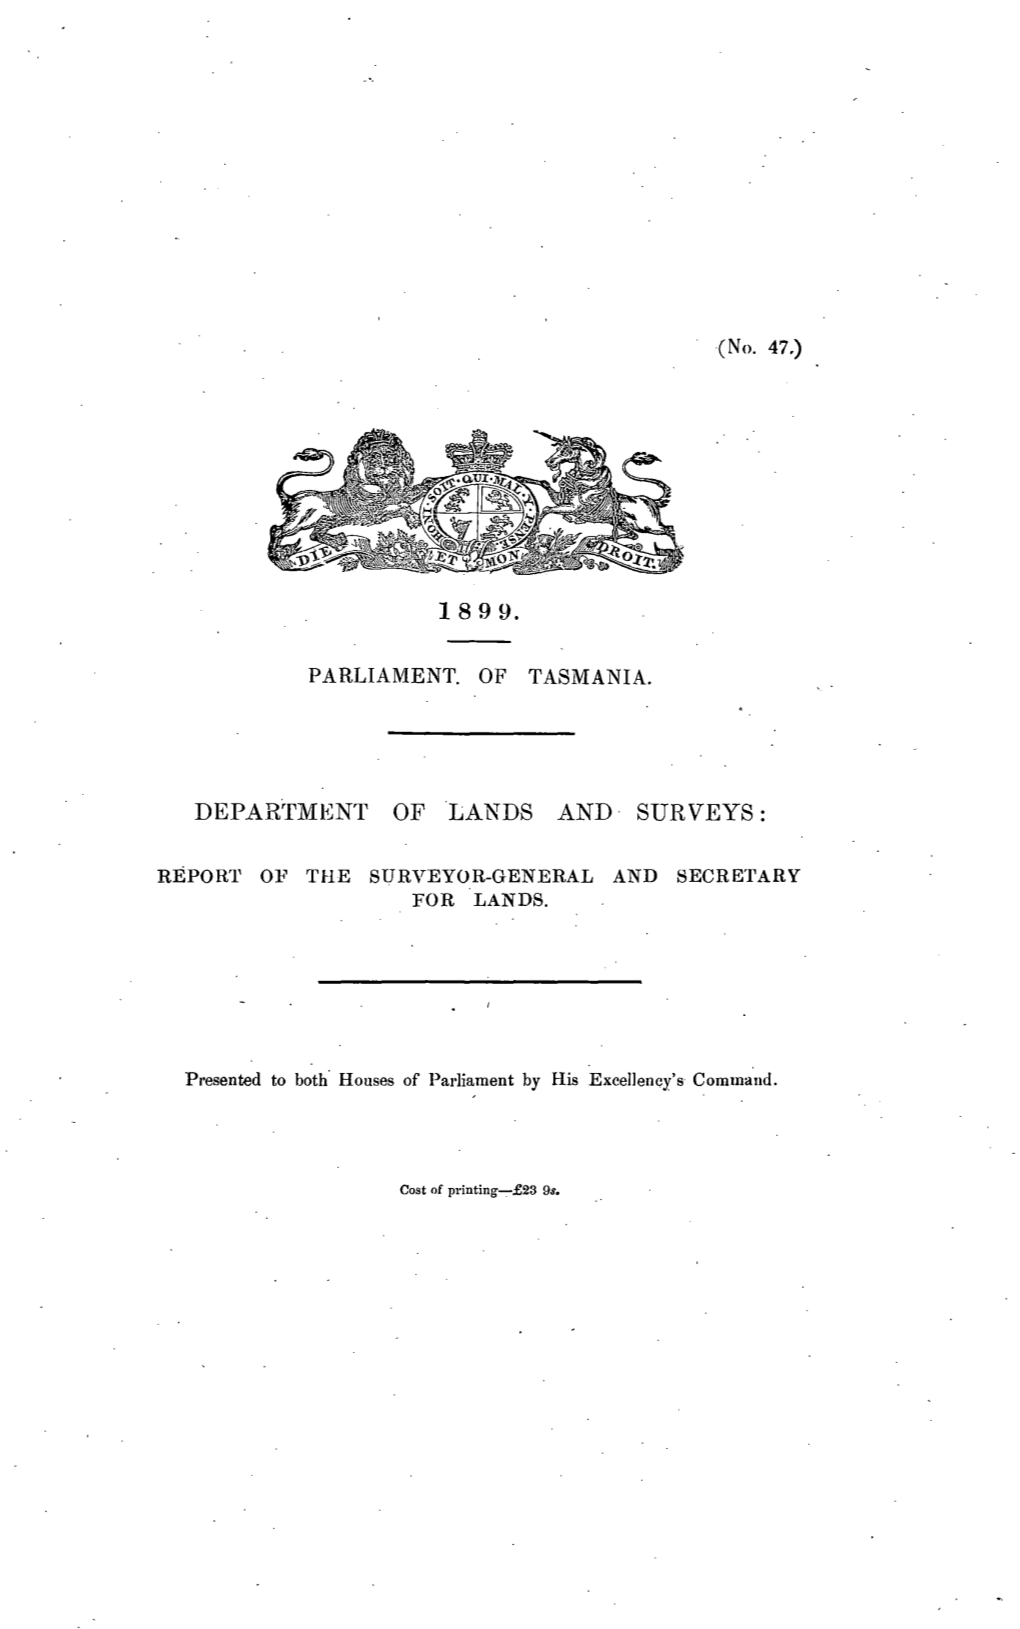 Department of Lands and Surveys Report of the Surveyor-General and Secretary for Lands